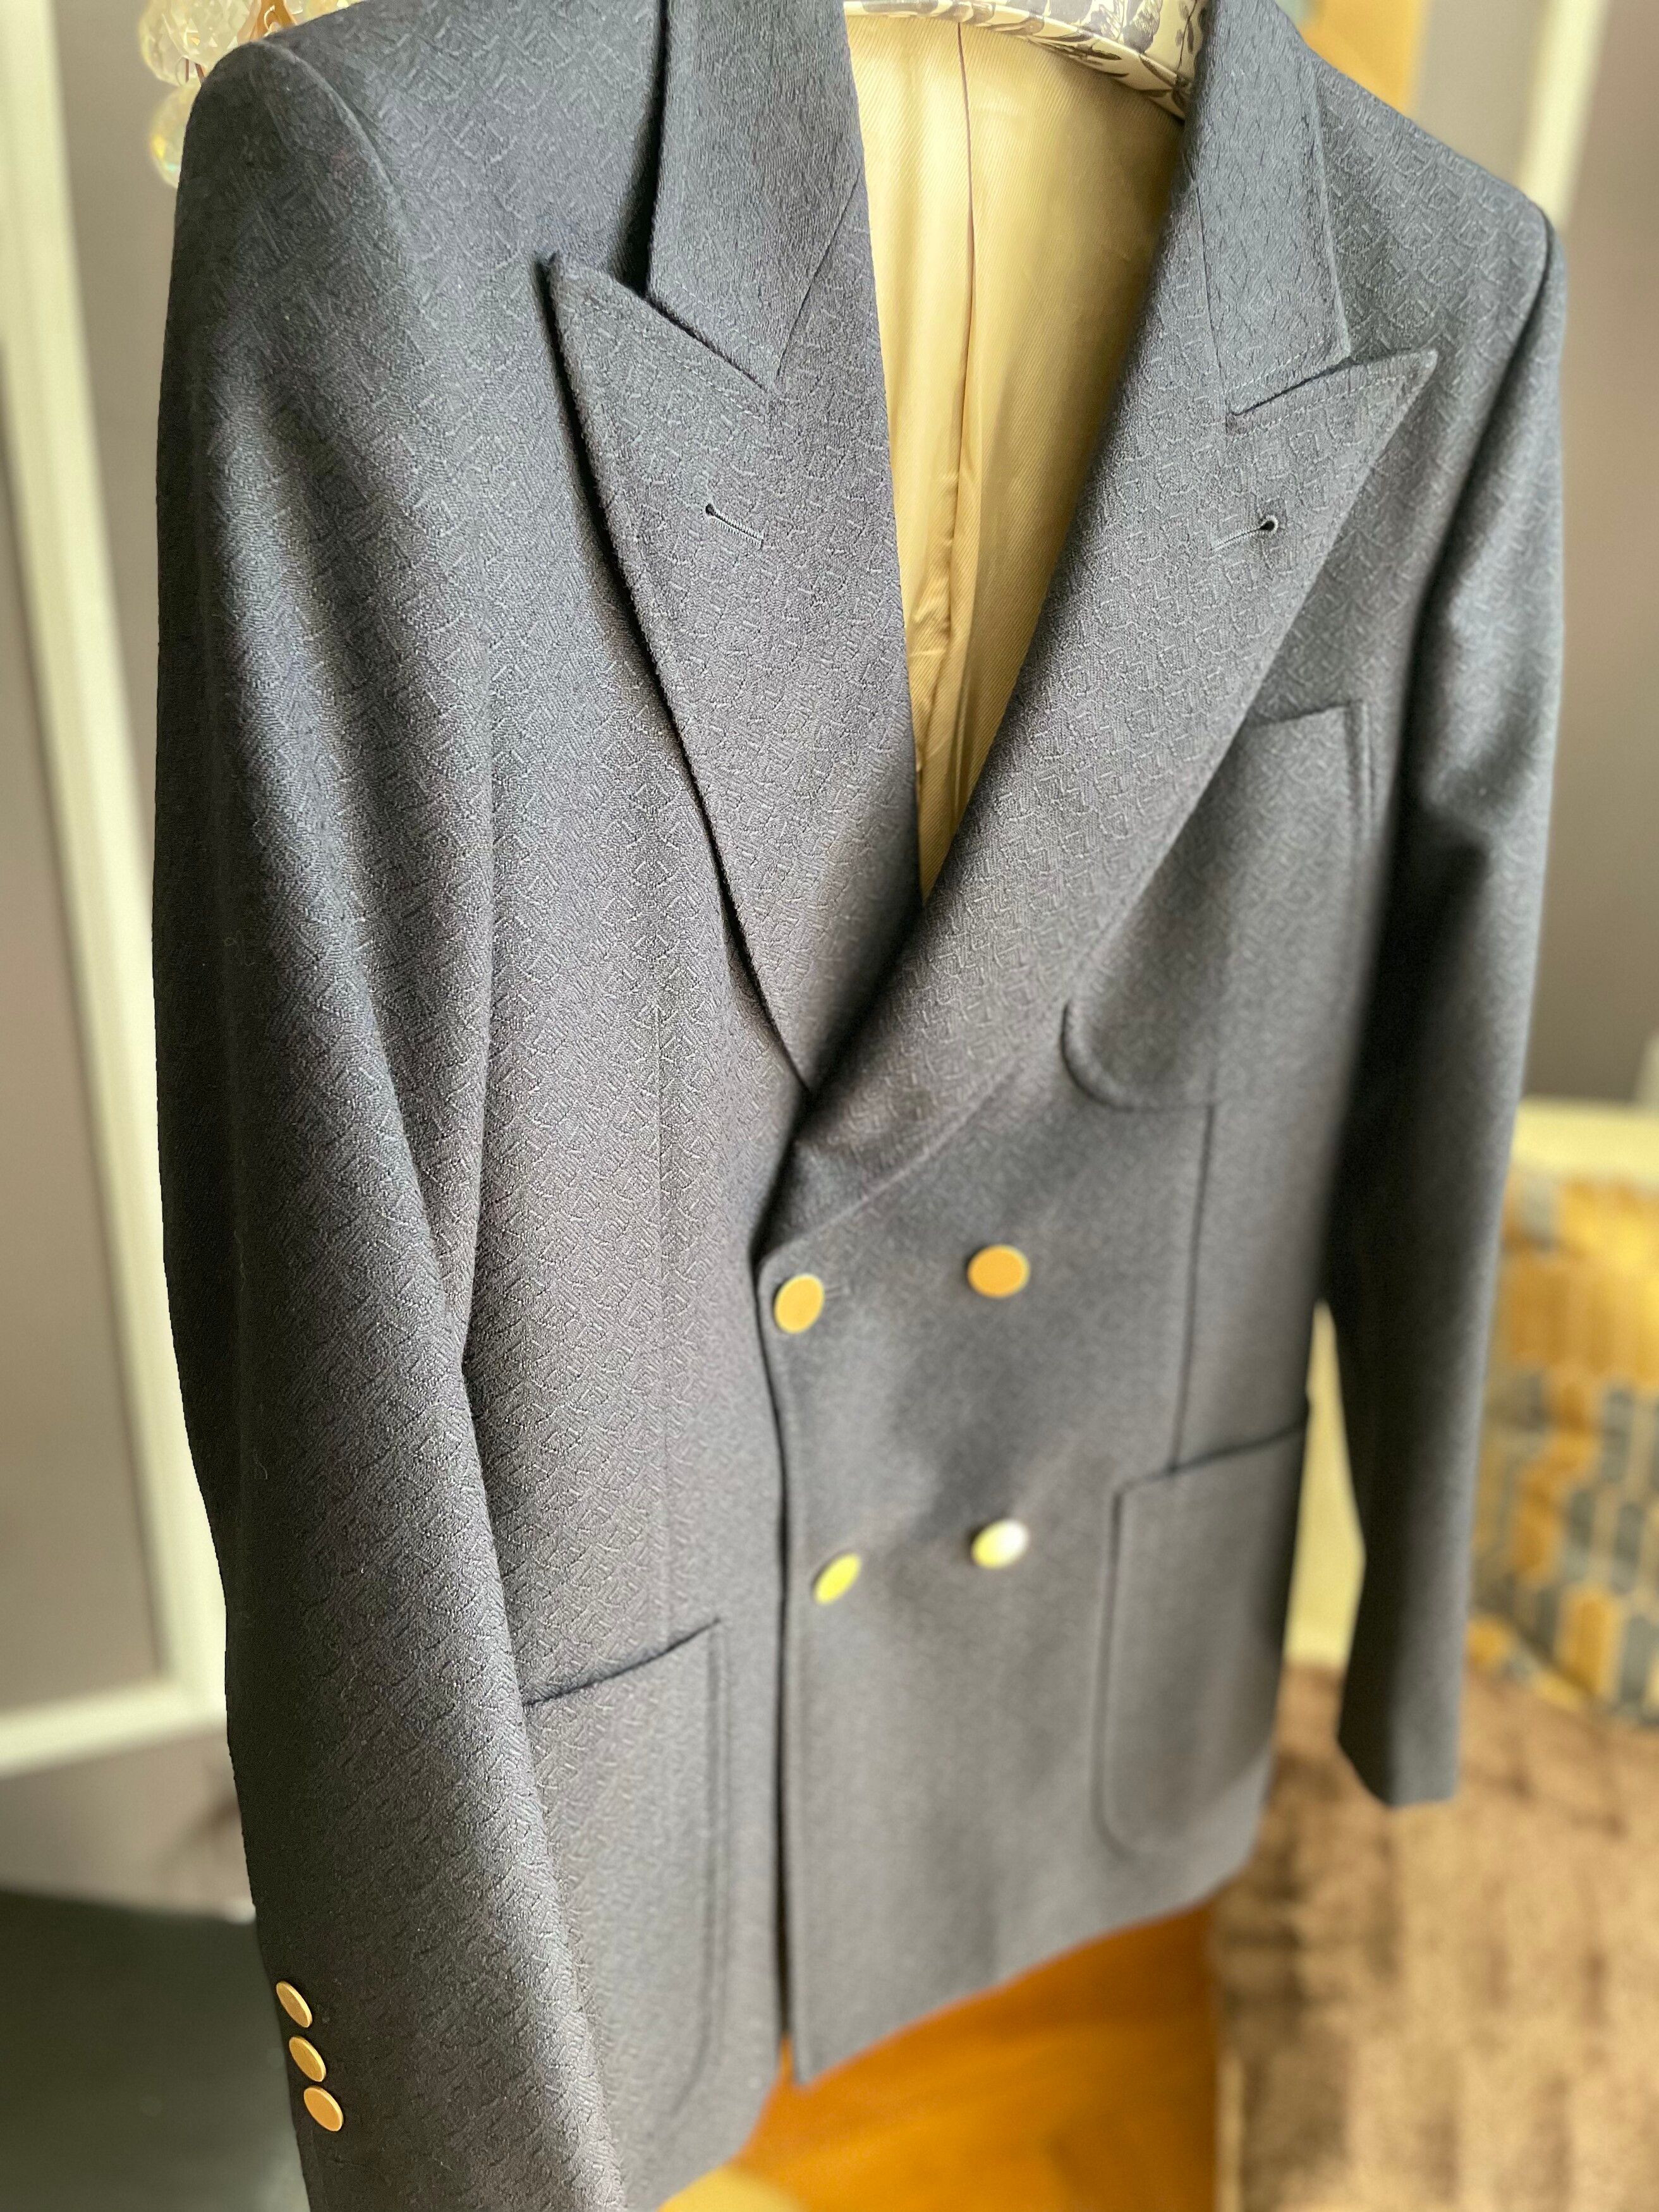 Gucci Gucci Navy Blue Texturized Double Breasted Blazer SS2020 Size 44R - 12 Thumbnail